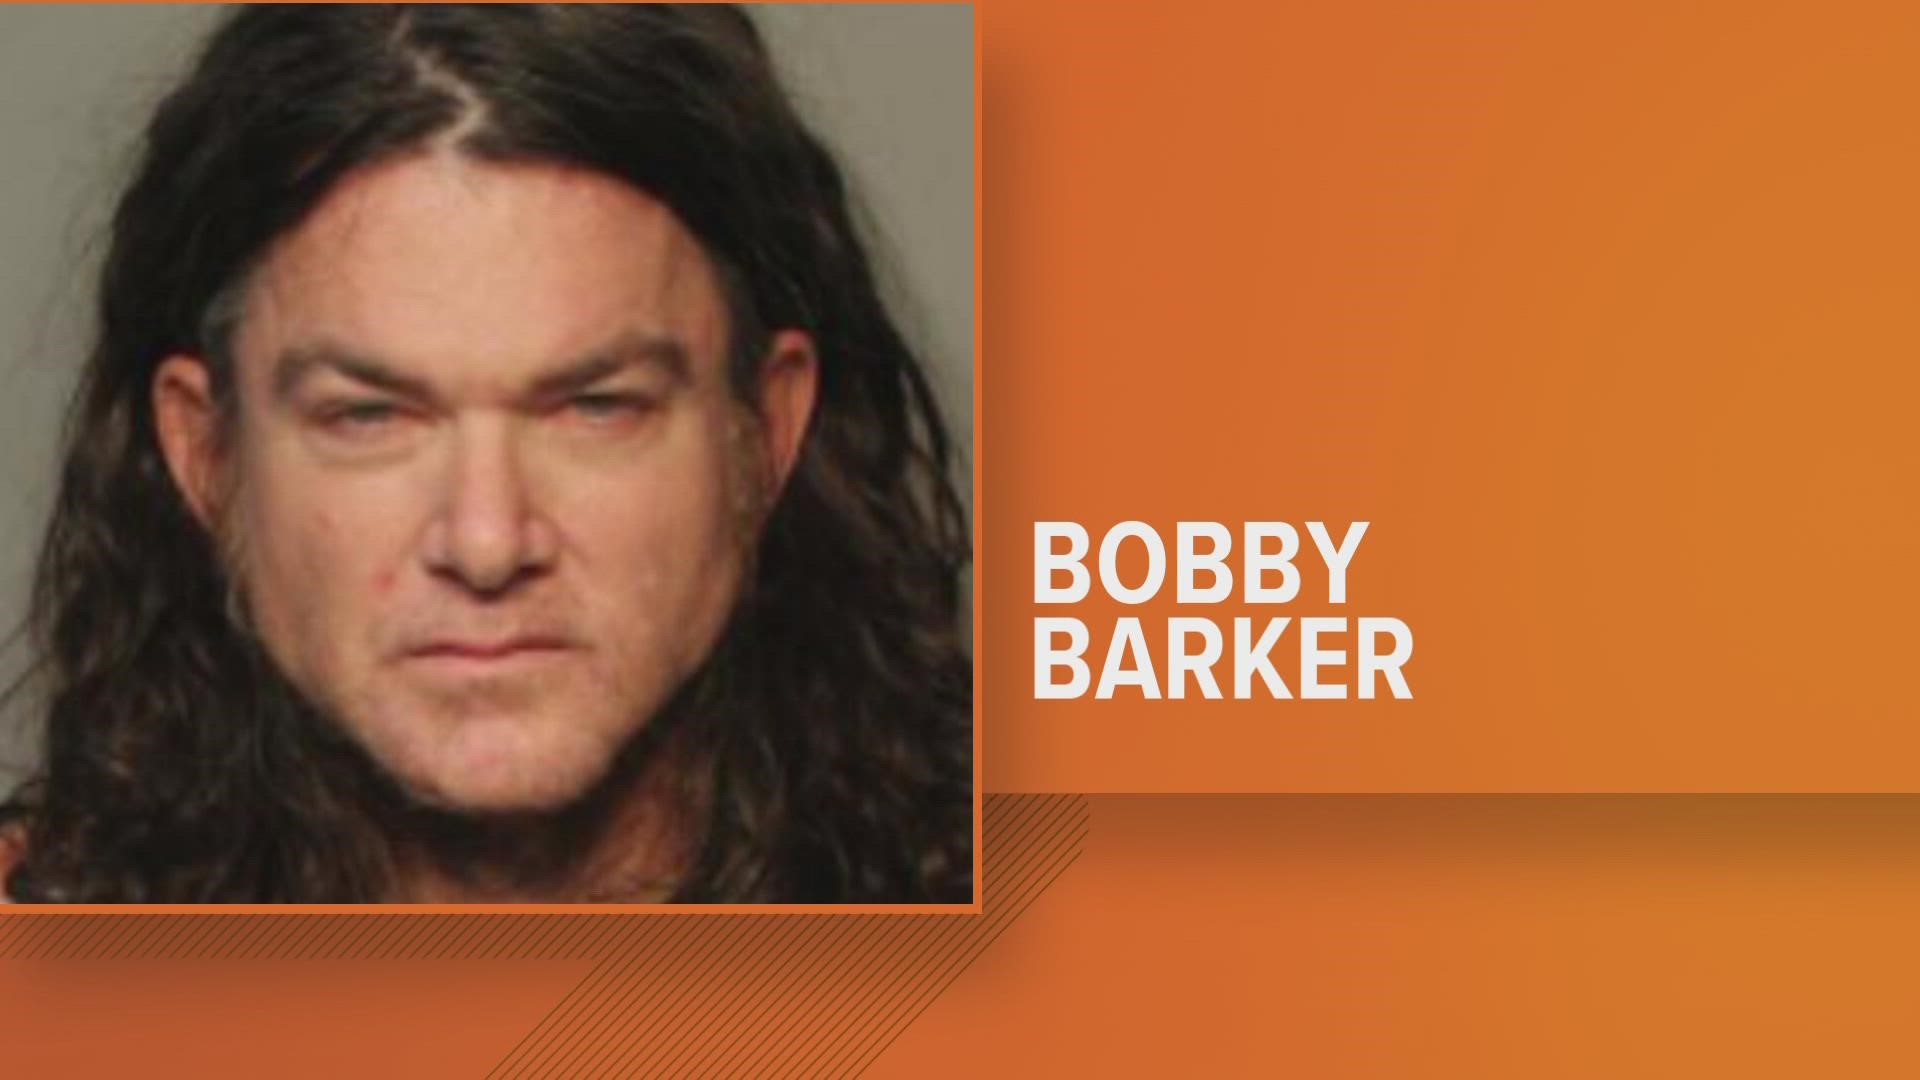 Police say 53-year-old Robert Barker fired a gun outside the Yankee Clipper bar in Ankeny.